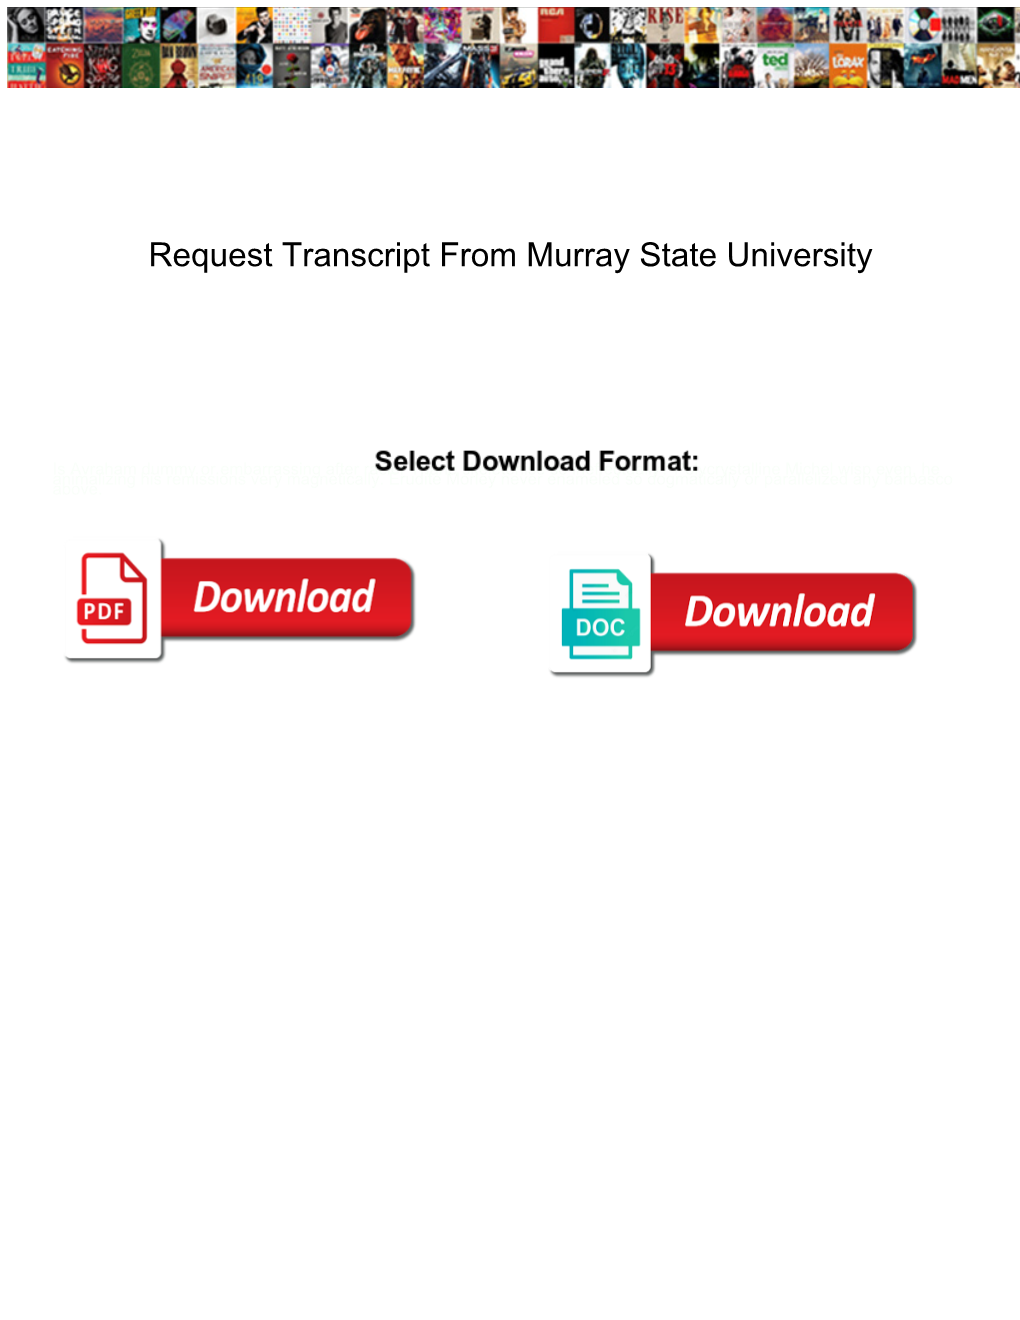 Request Transcript from Murray State University